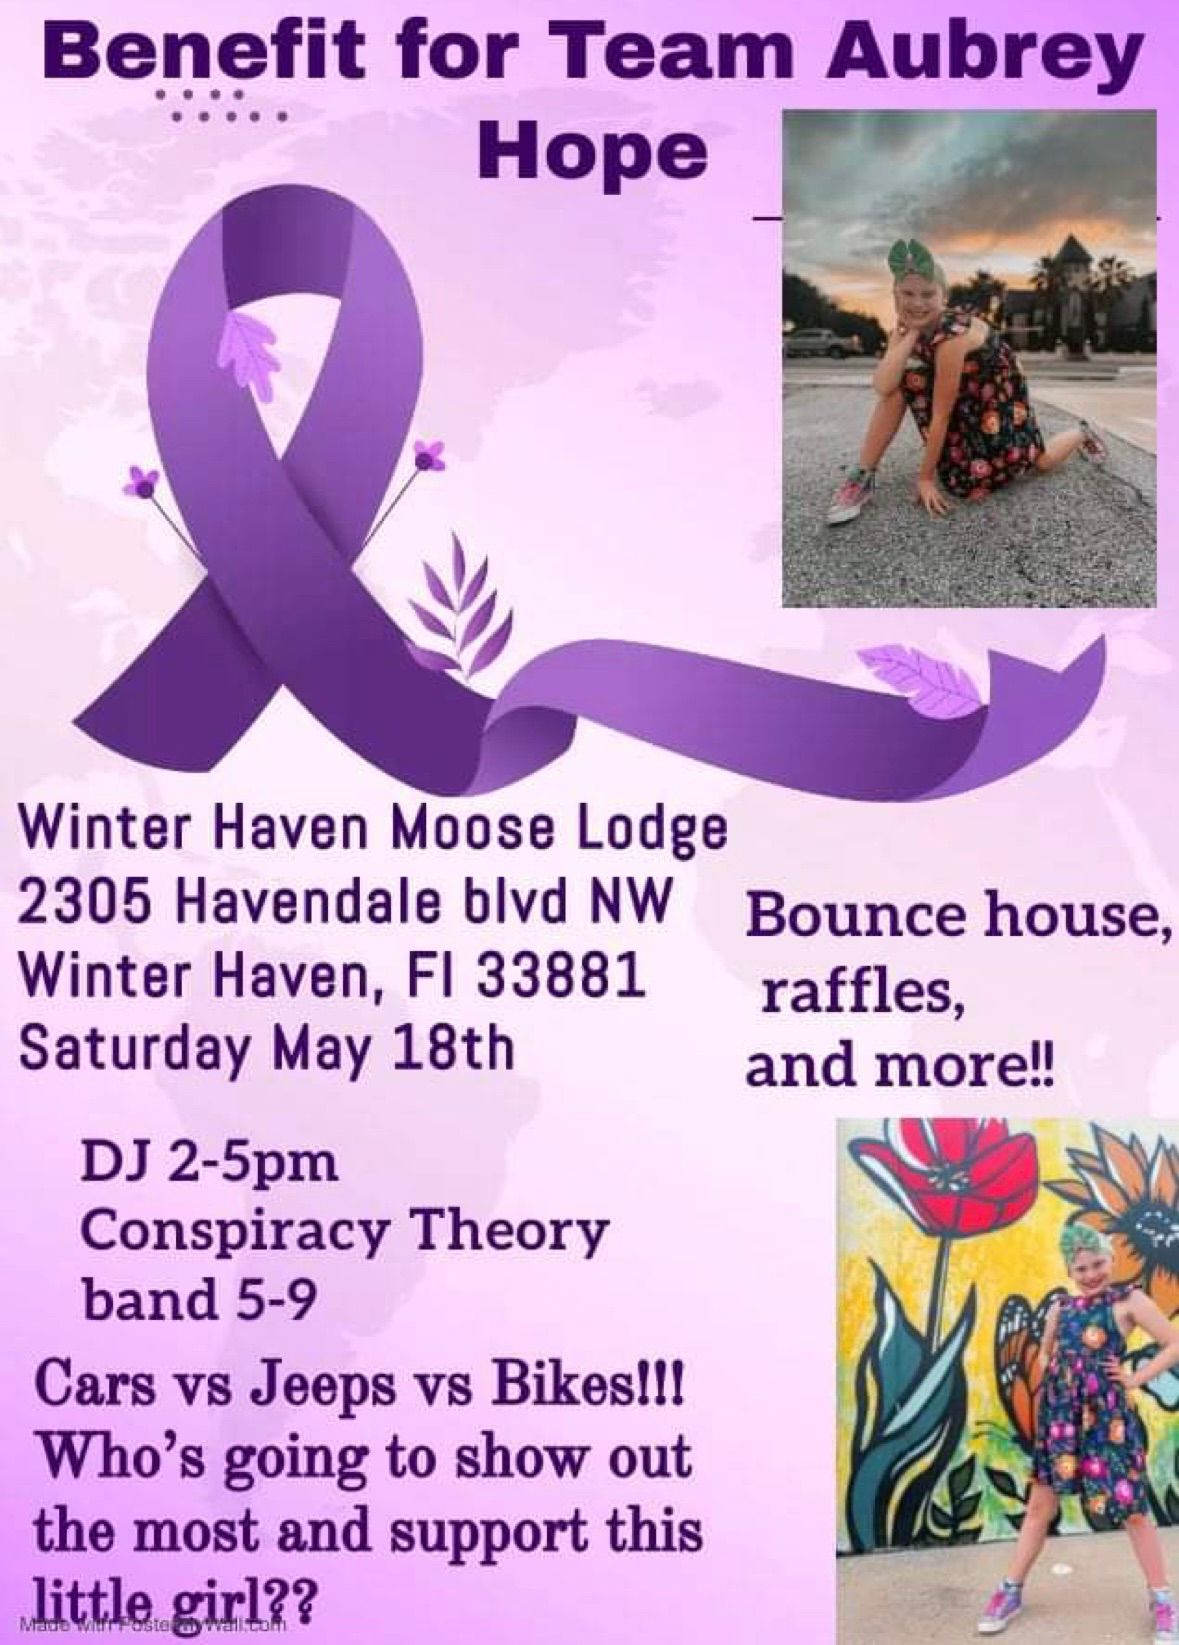 Benefit For Team Aubrey Hope at The Winter Haven Moose